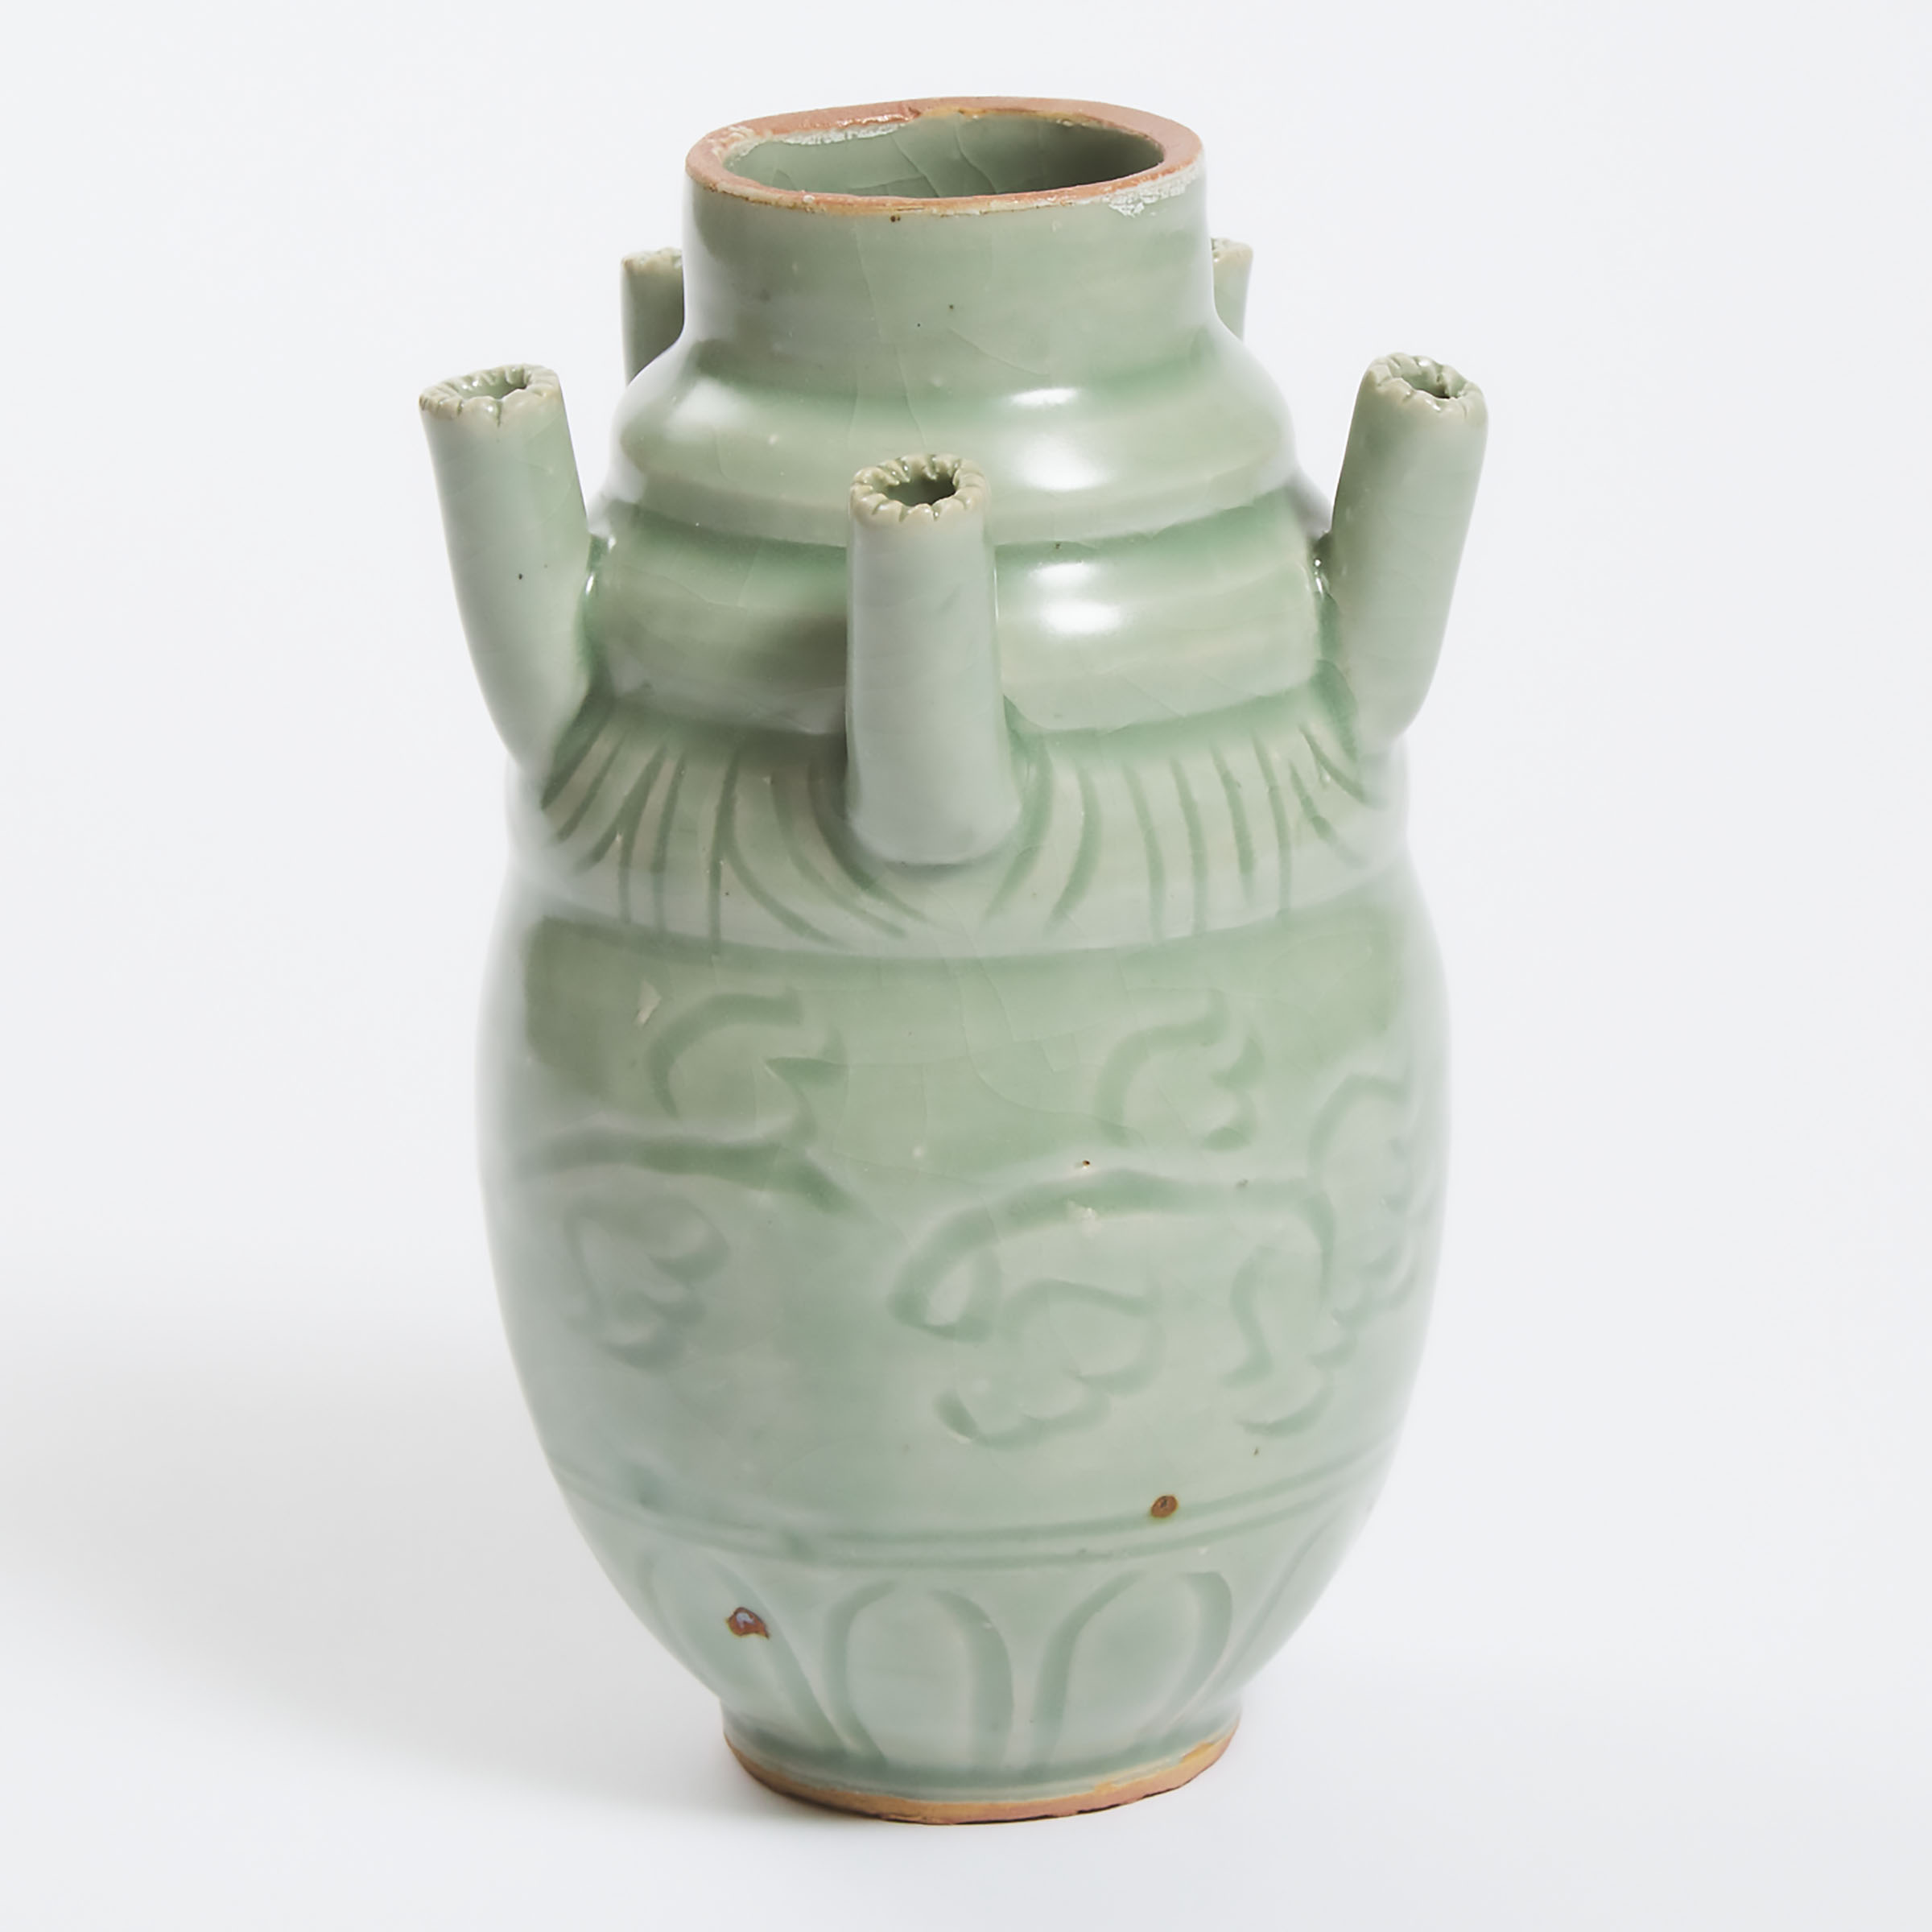 A Longquan-Style Vase With Five Spouts